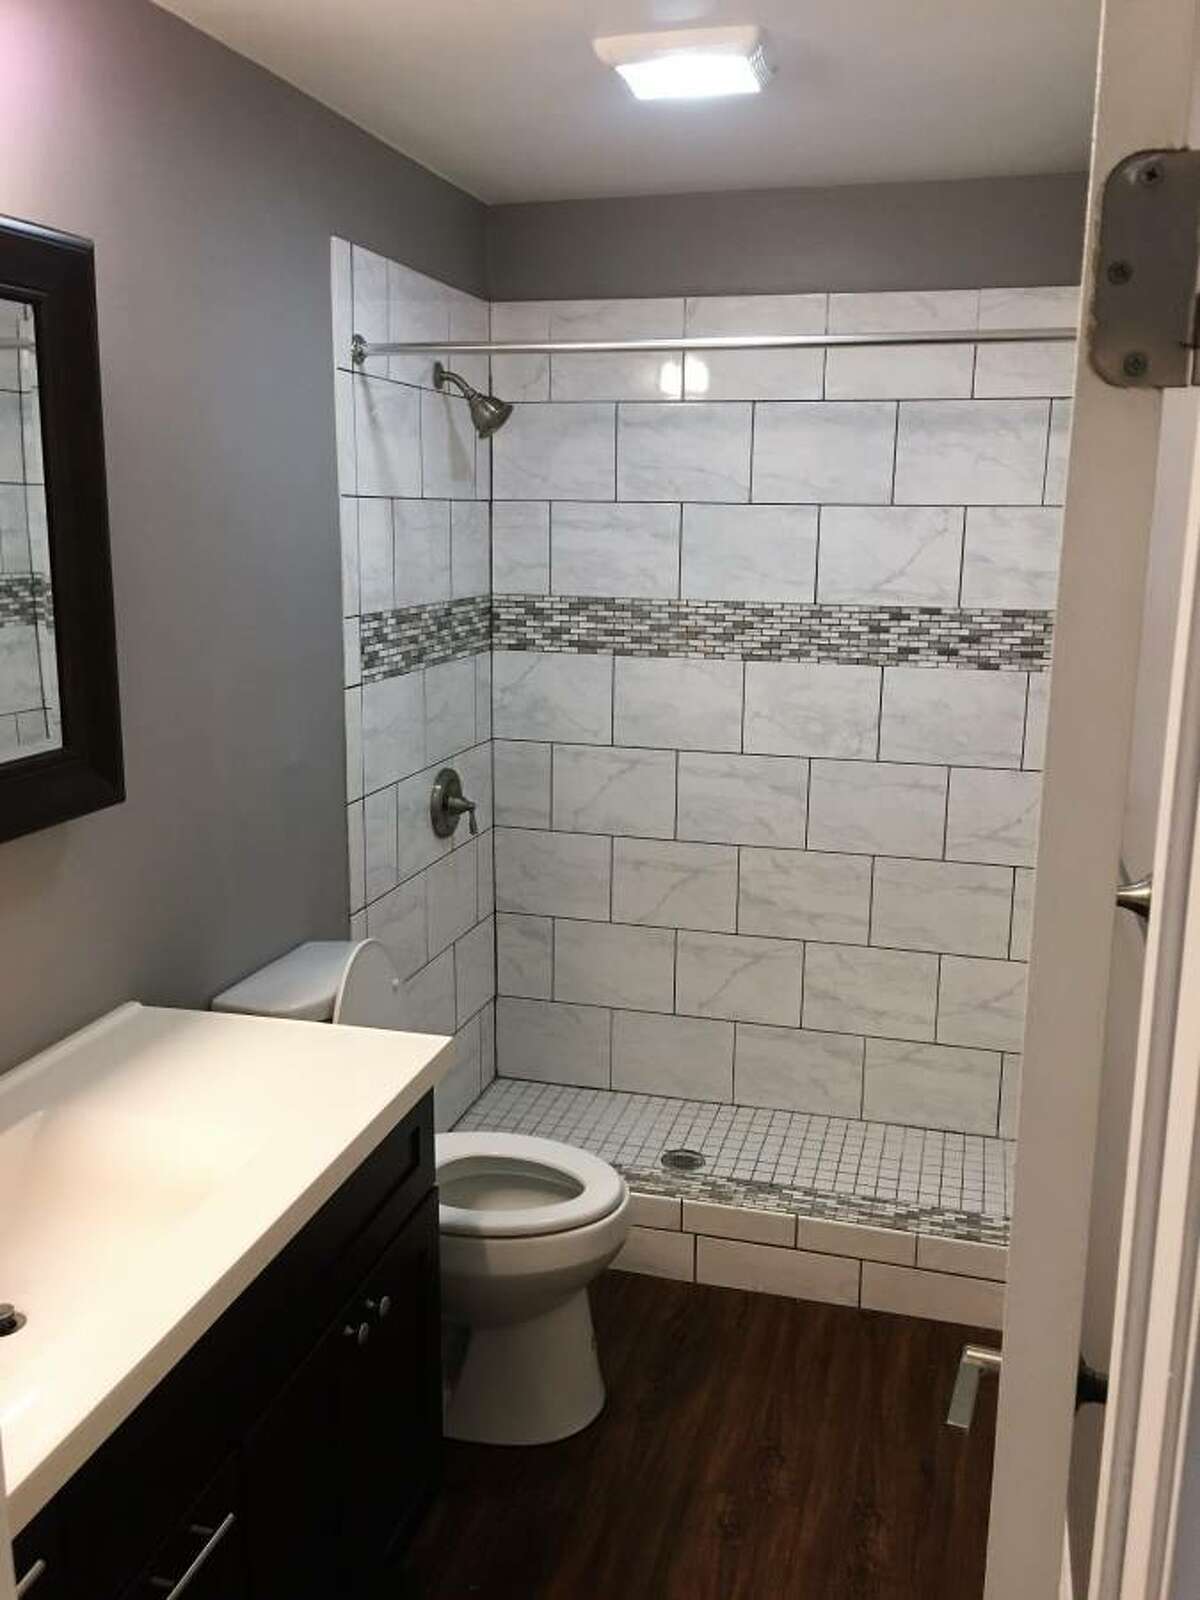 The refreshed look includes custom tile work in the bathroom.